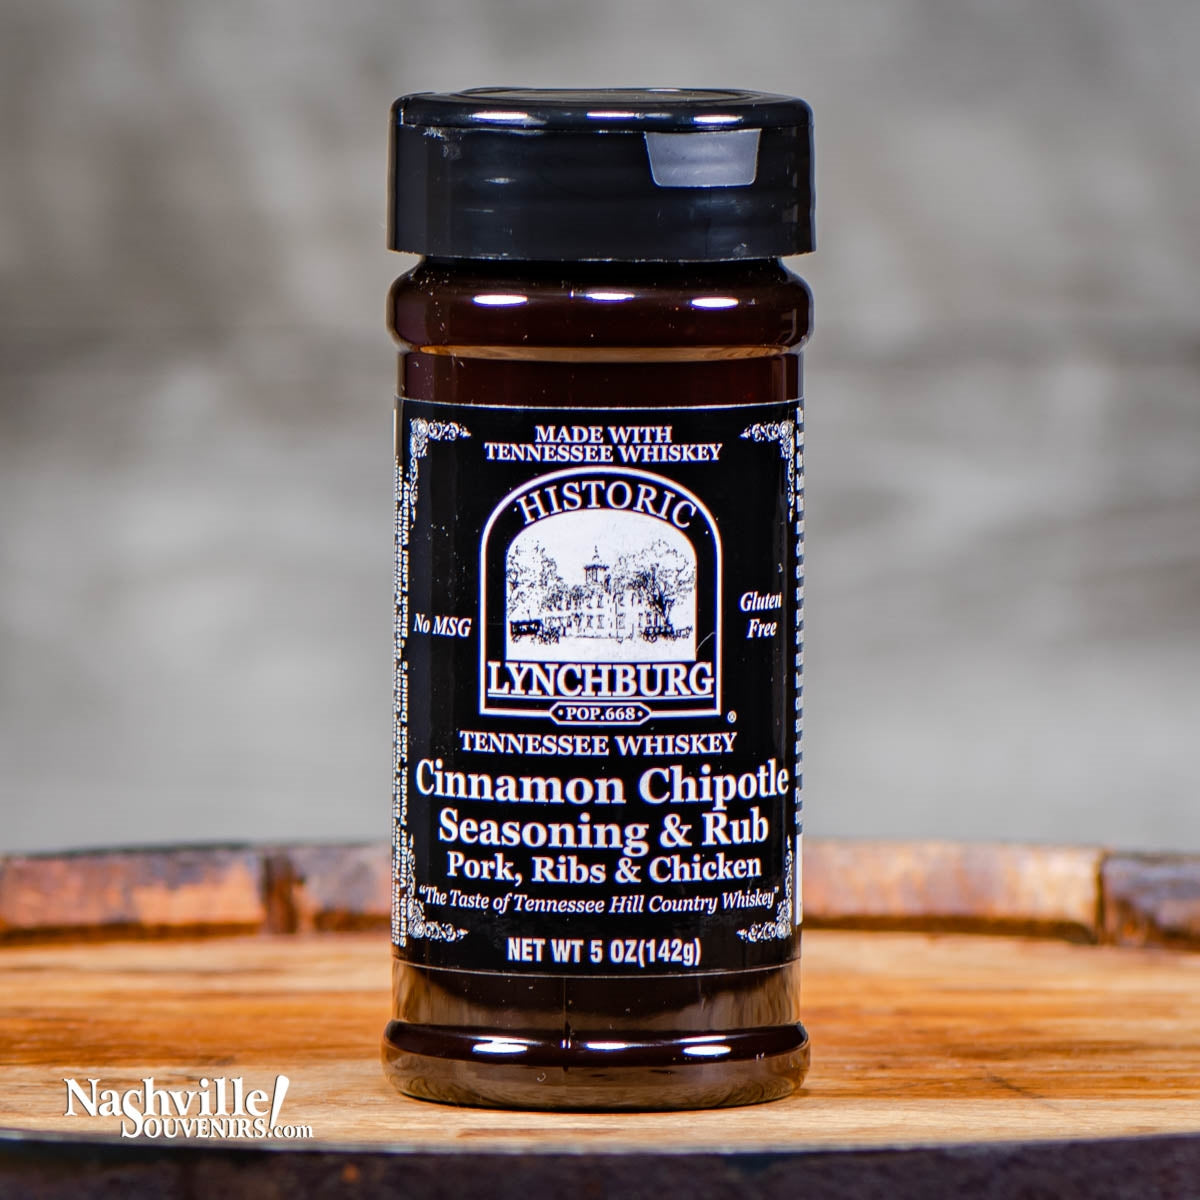 Buy Historic Lynchburg Cinnamon Chipotle Rub containing real Jack Daniels Tennessee whiskey.  FREE SHIPPING on all US orders over $75!